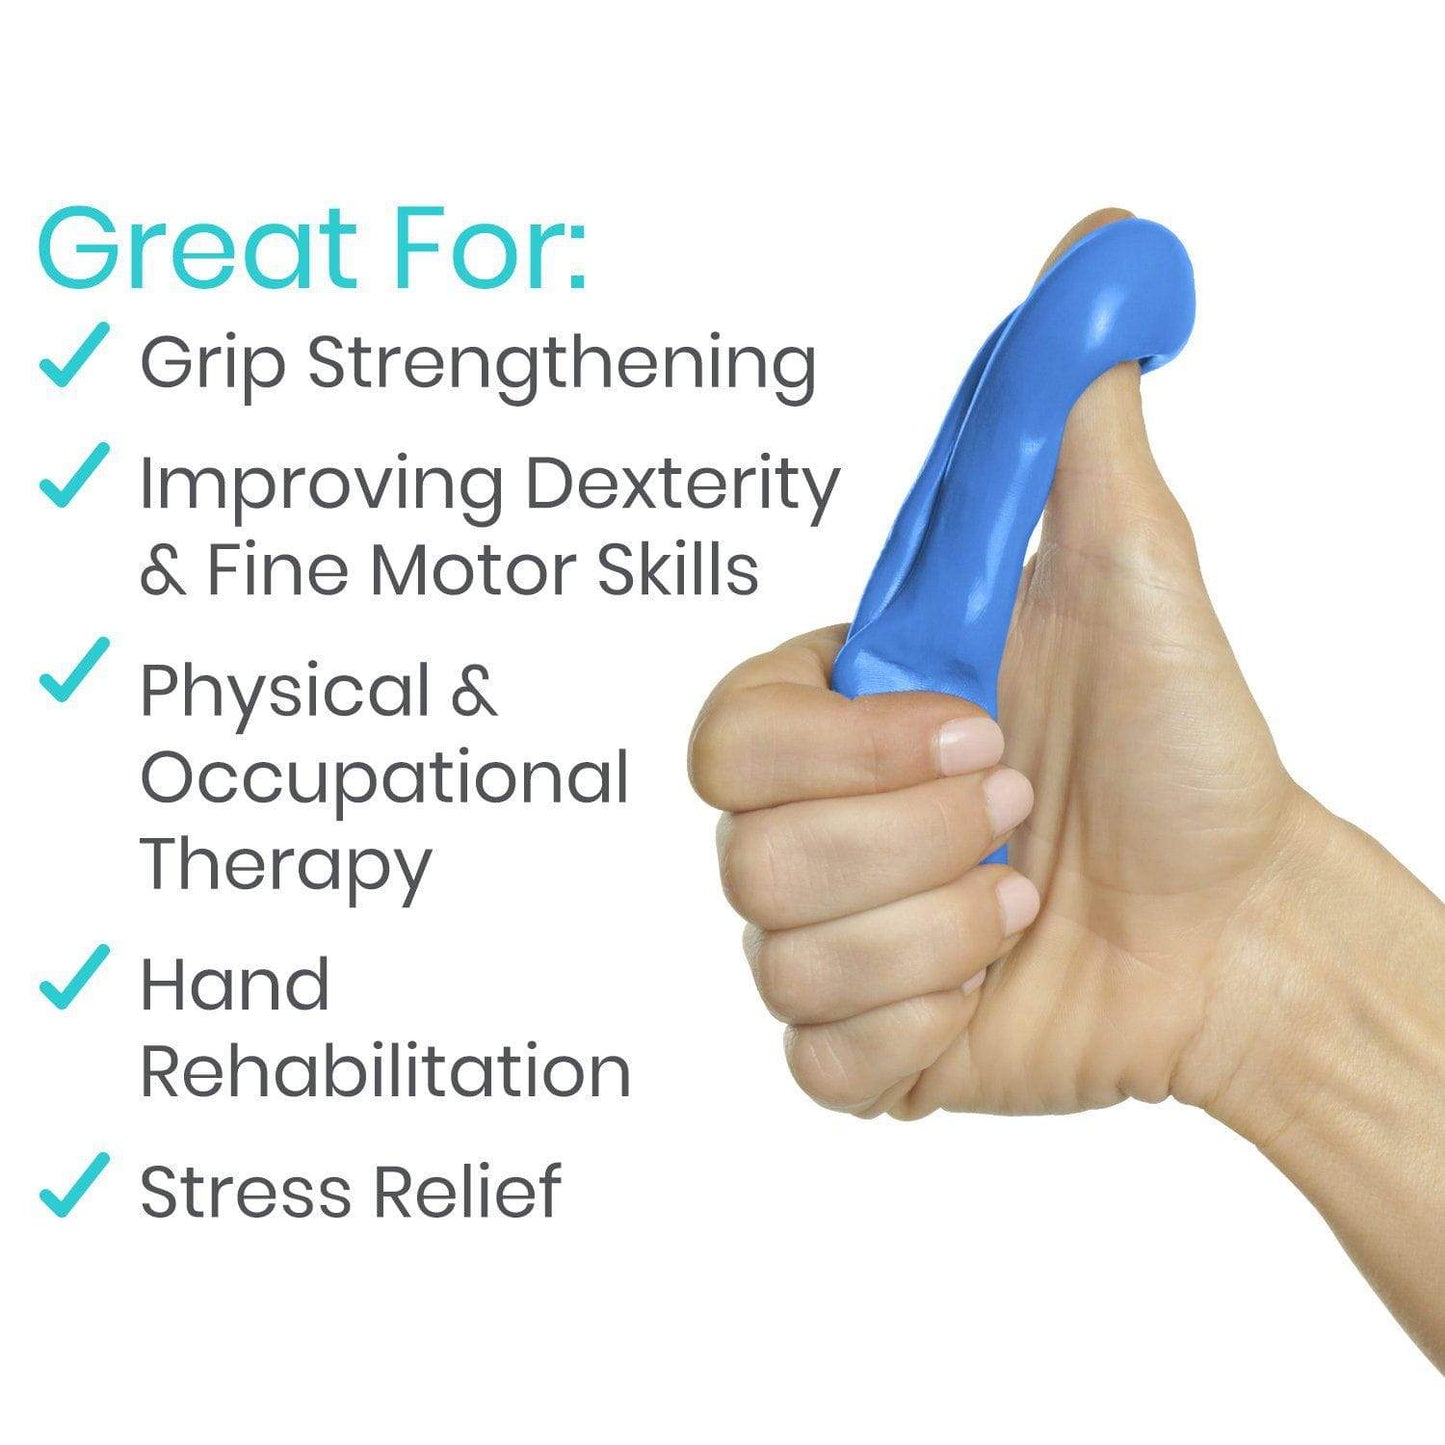 Therapy Putty